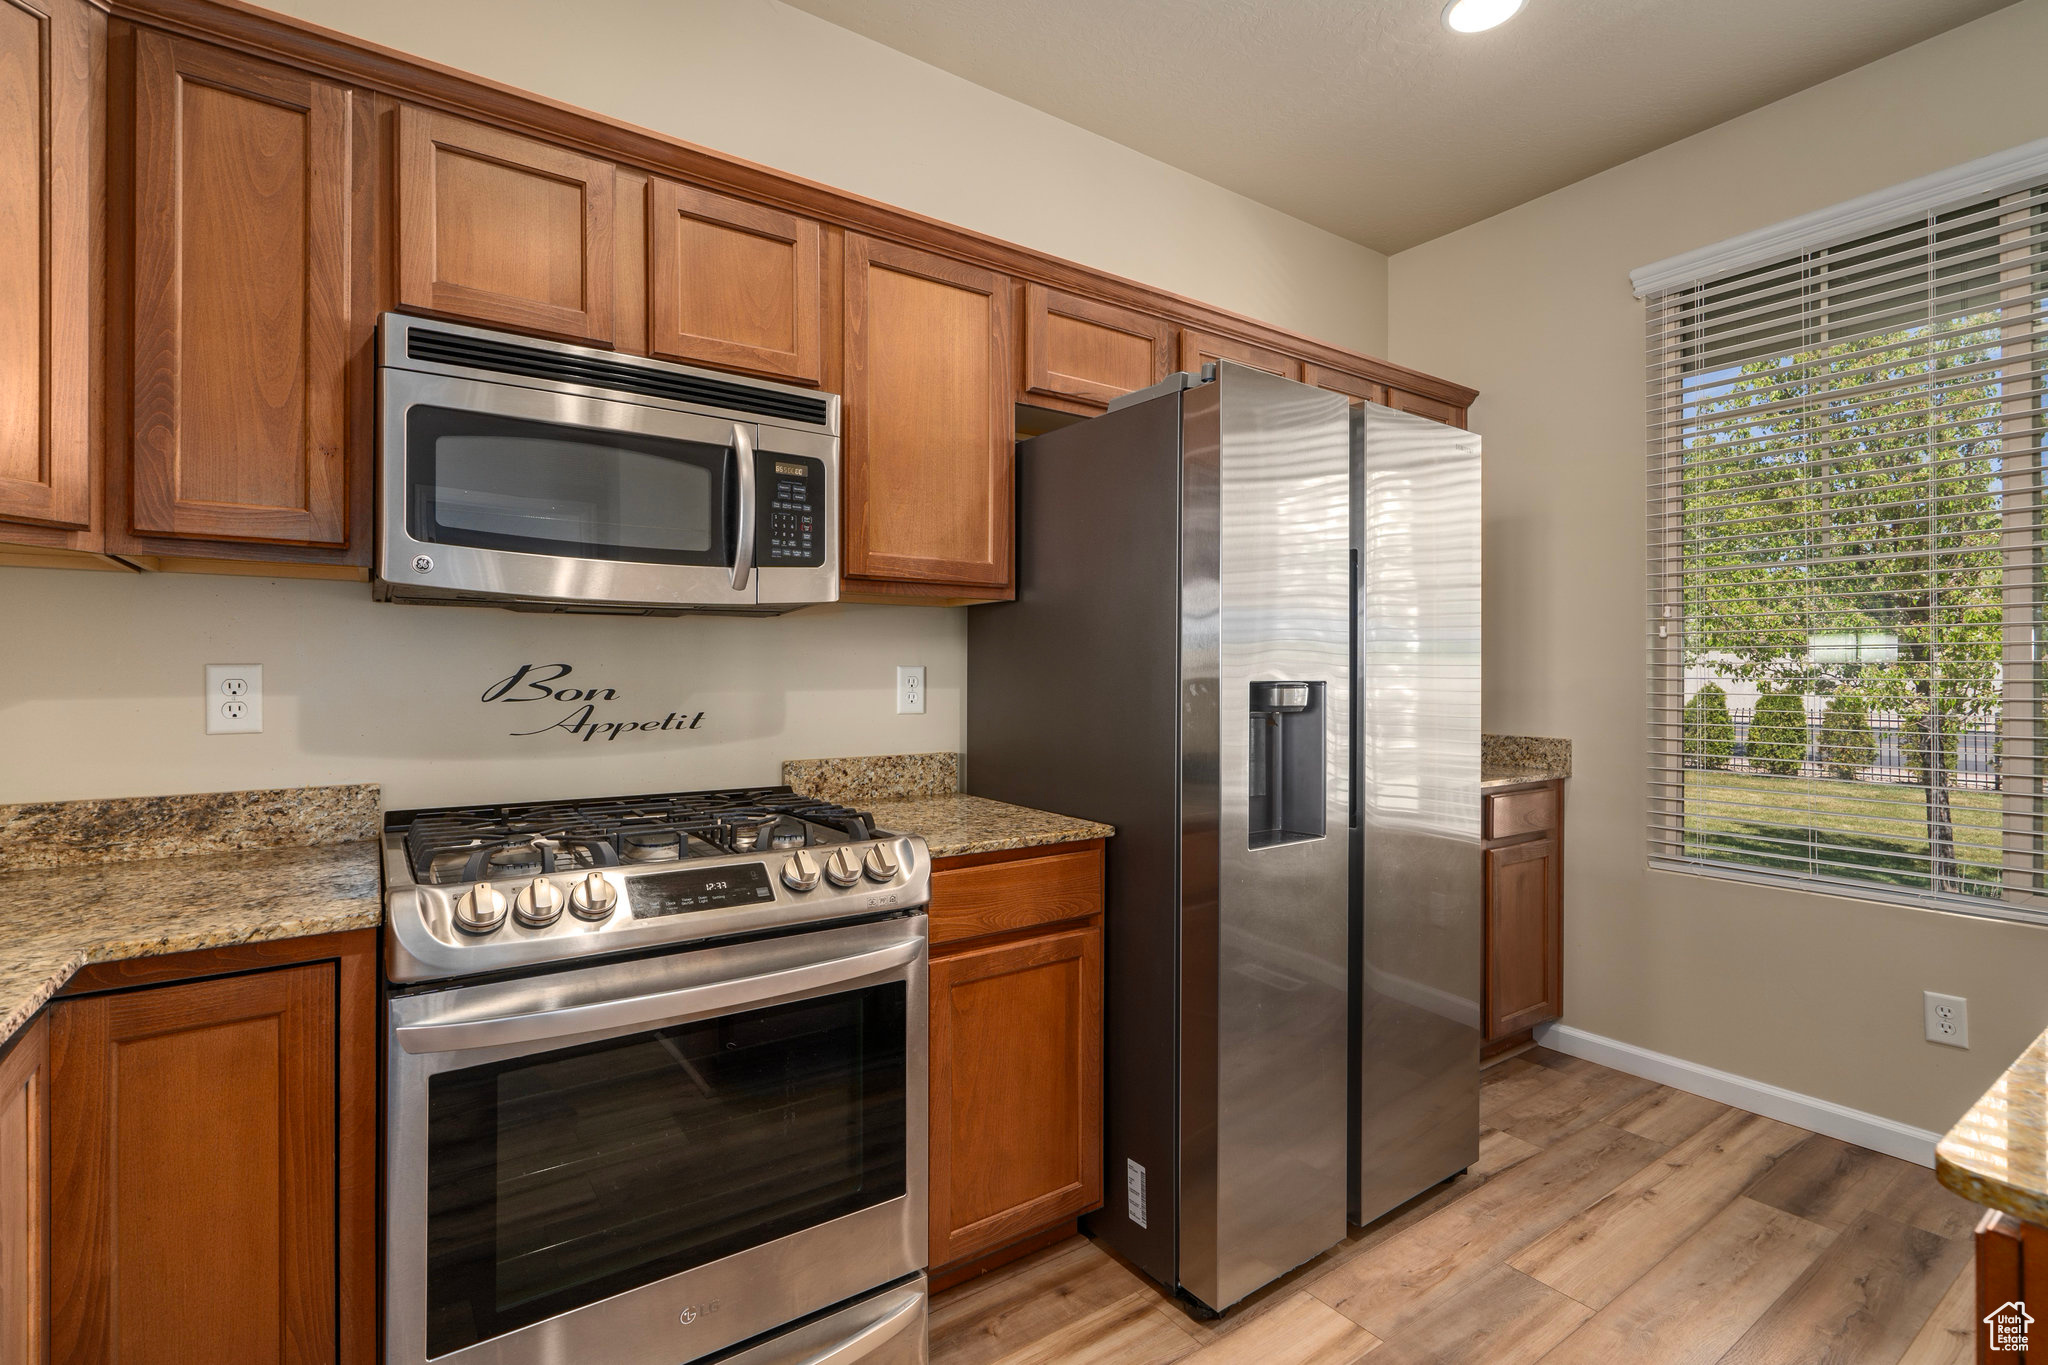 Kitchen featuring light hardwood / wood-style floors, appliances with stainless steel finishes, and light stone countertops